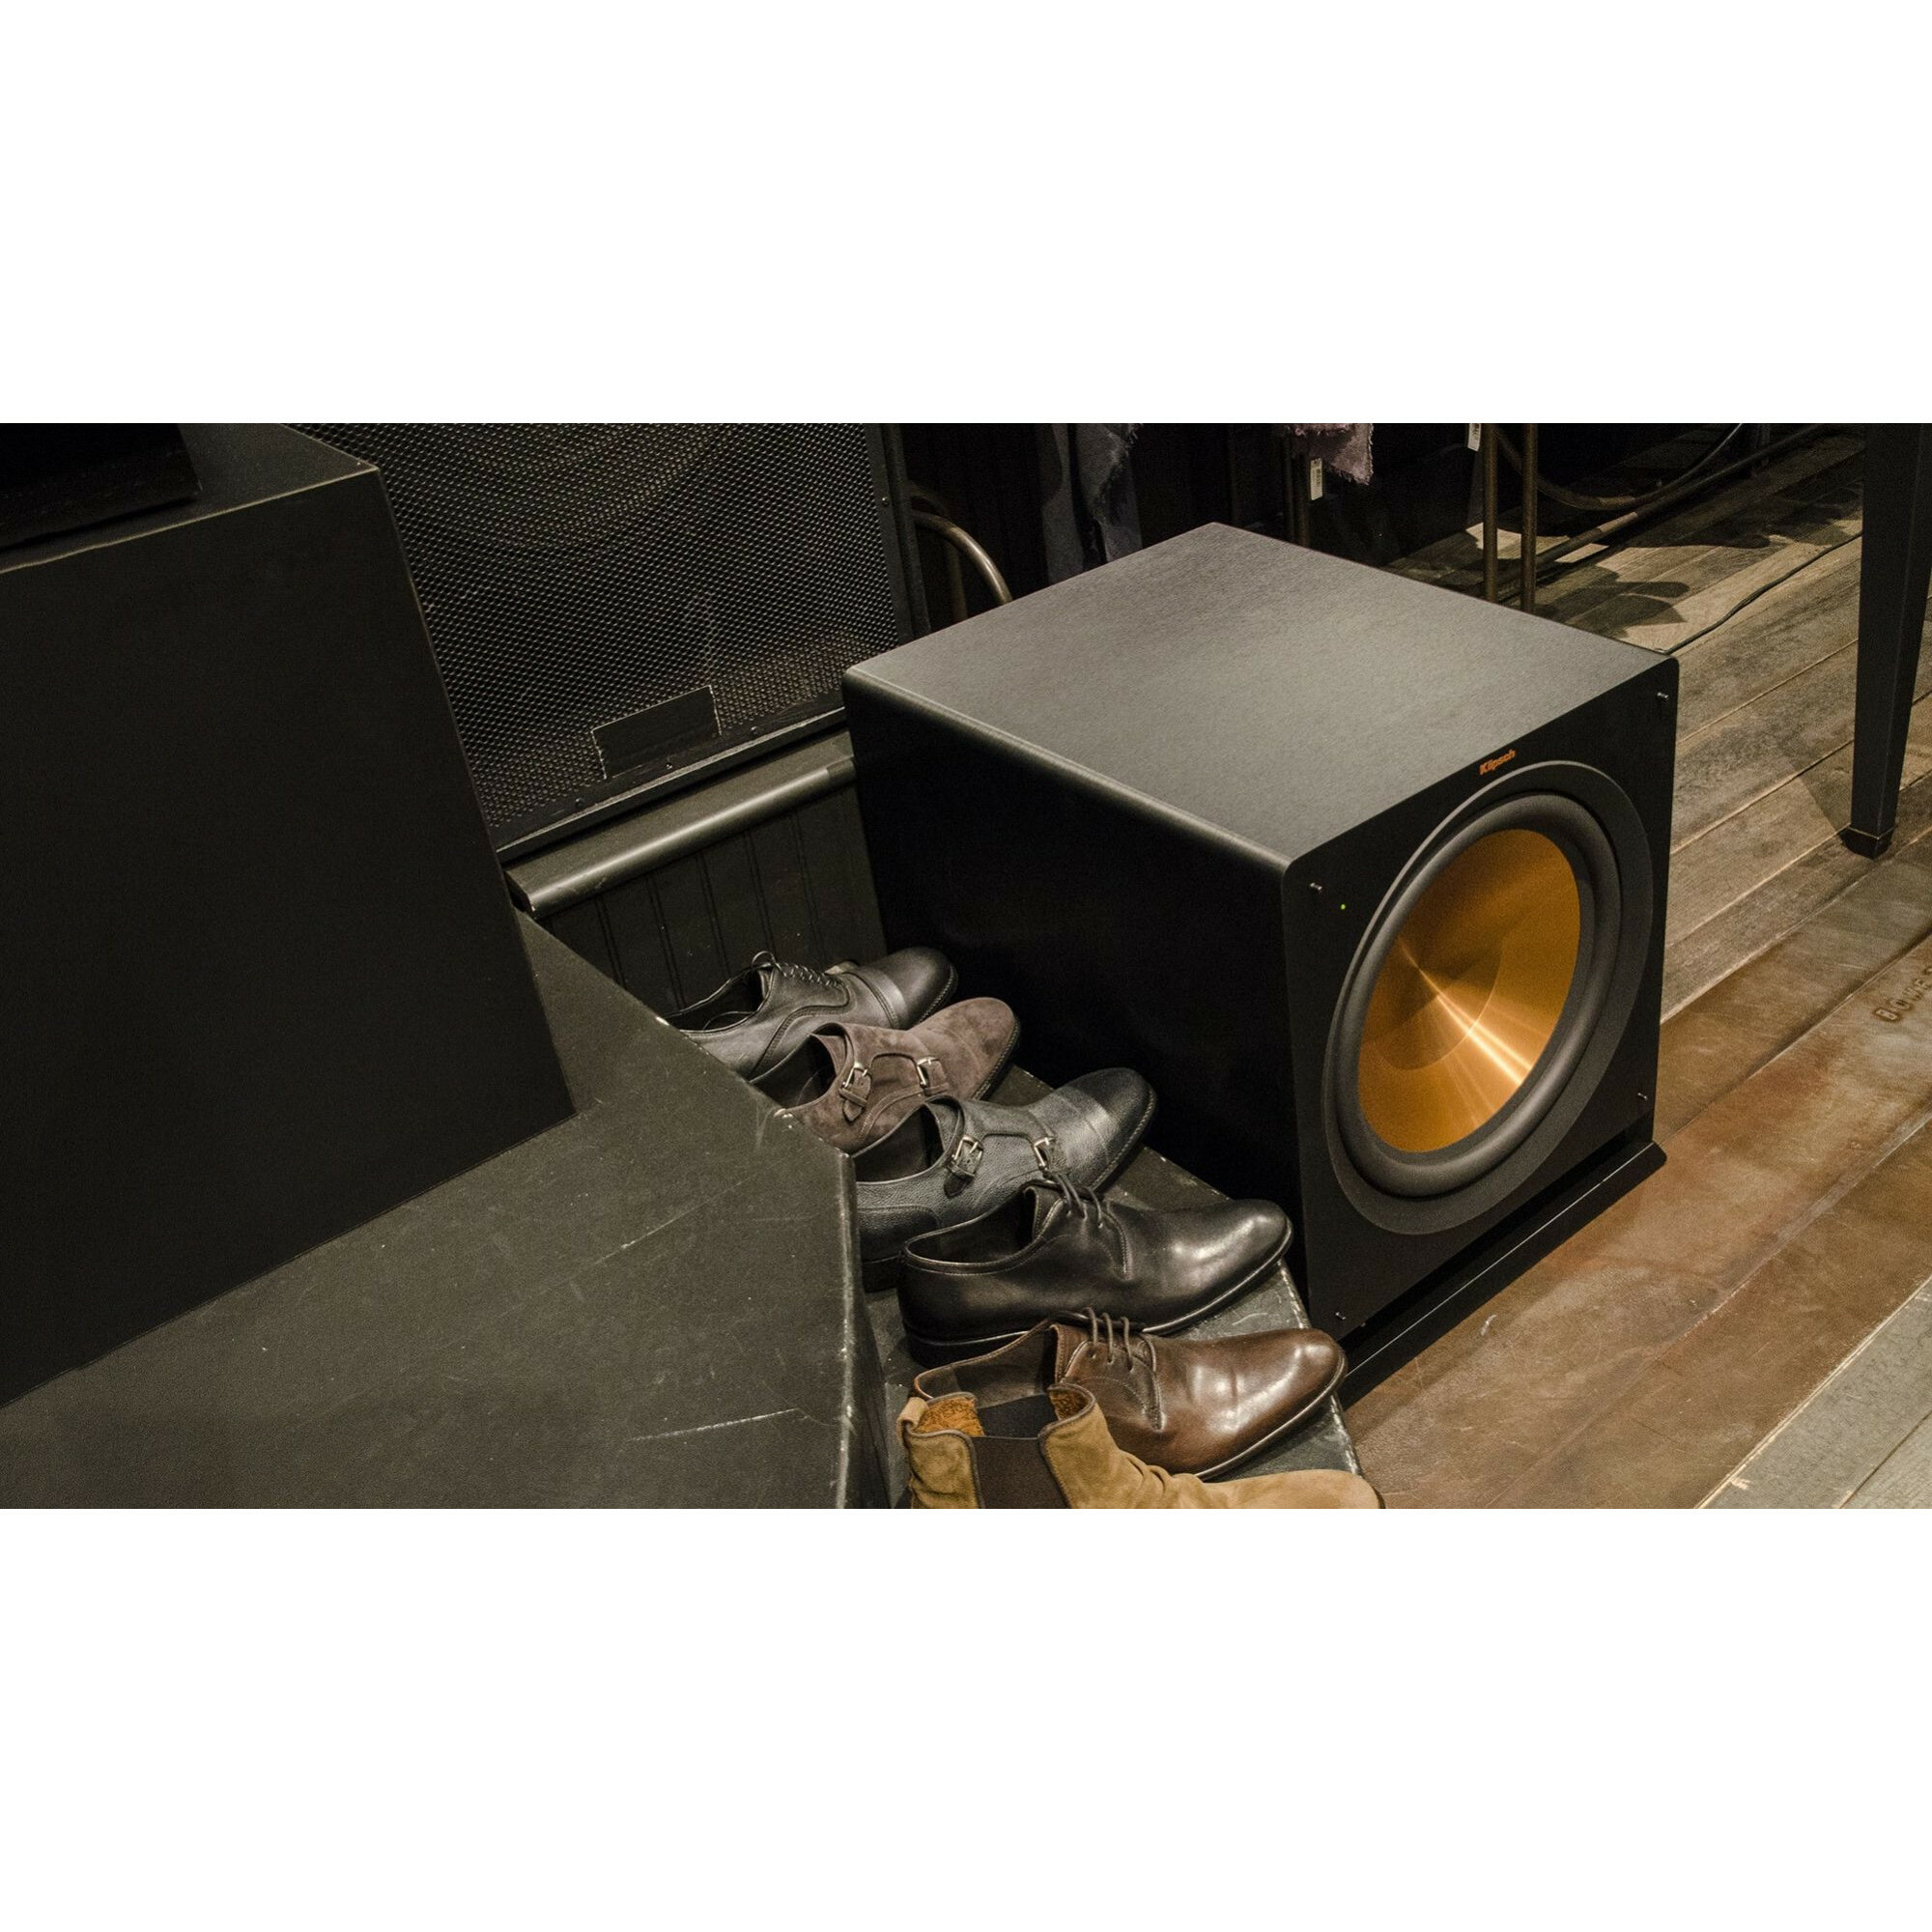 Klipsch R-15PM Powered Monitors, 2 Self Powered Easy to Use Speakers and Wireless Bluetooth Technology, Digital Optical and Analog RCA and USB Inputs. - image 2 of 8